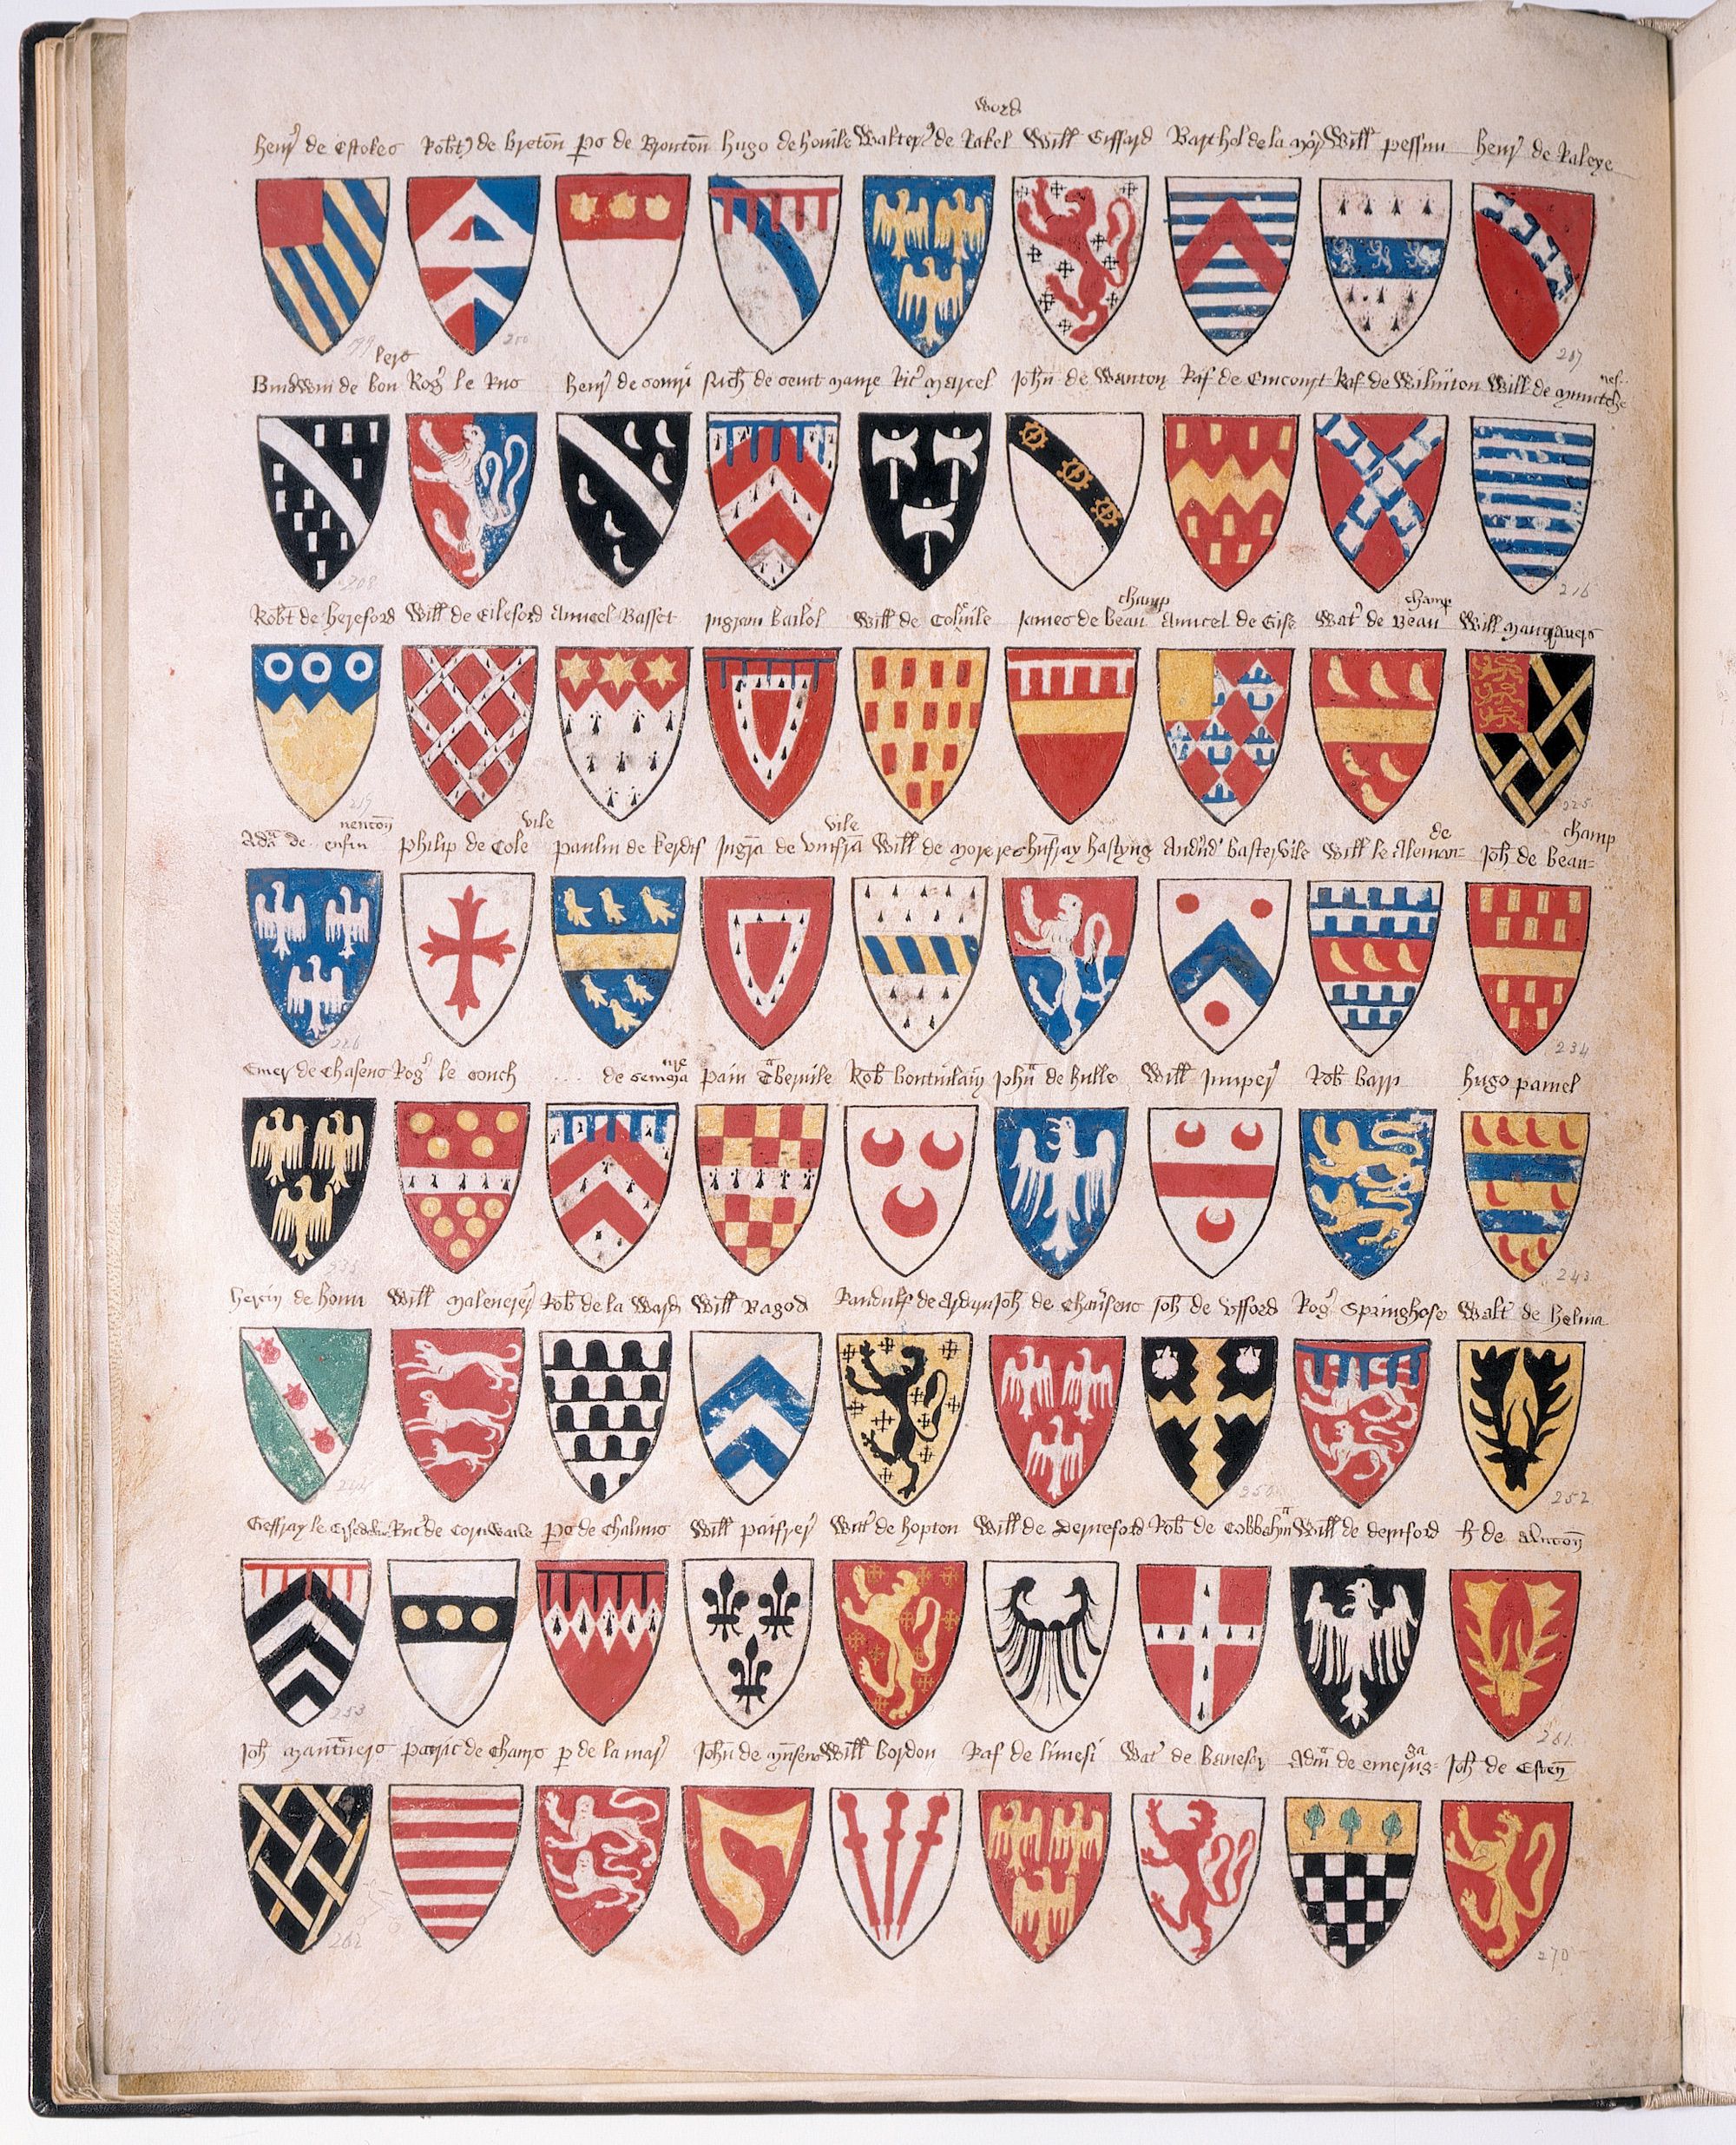 Hatton-Dugdale Book of Arms - Society of Antiquaries of London